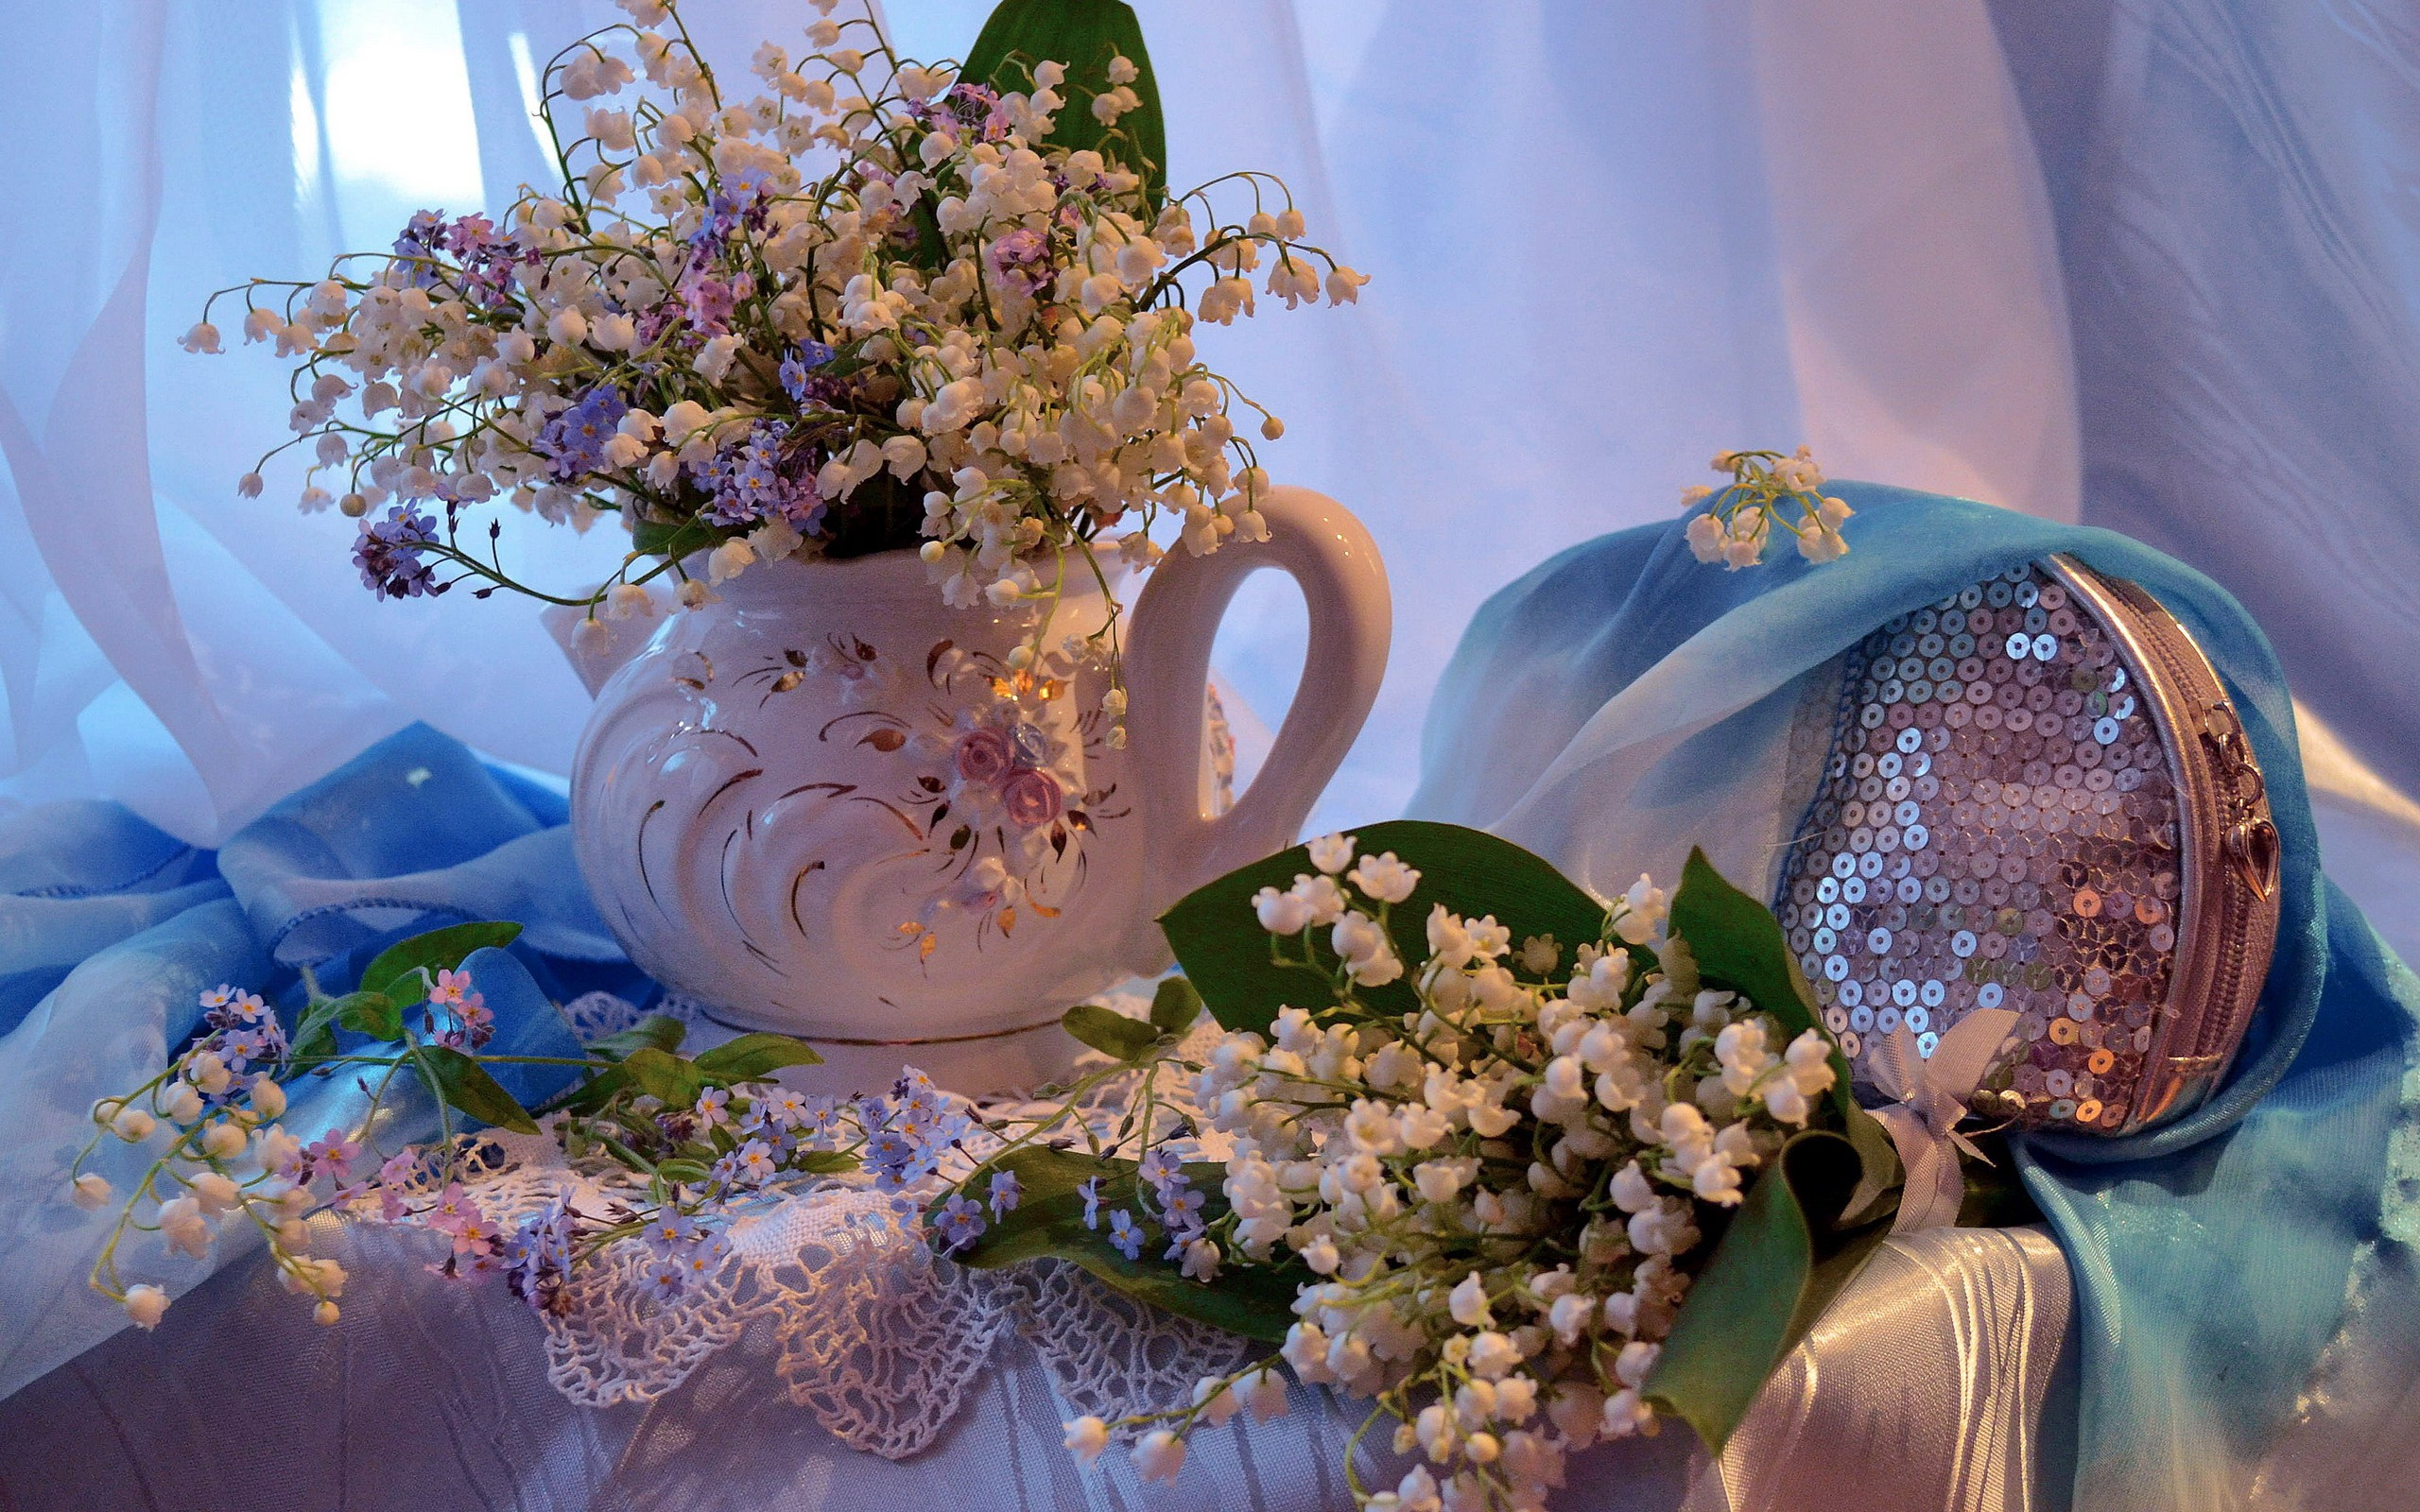 lily of the valley, photography, still life, curtain, purse, vase UHD